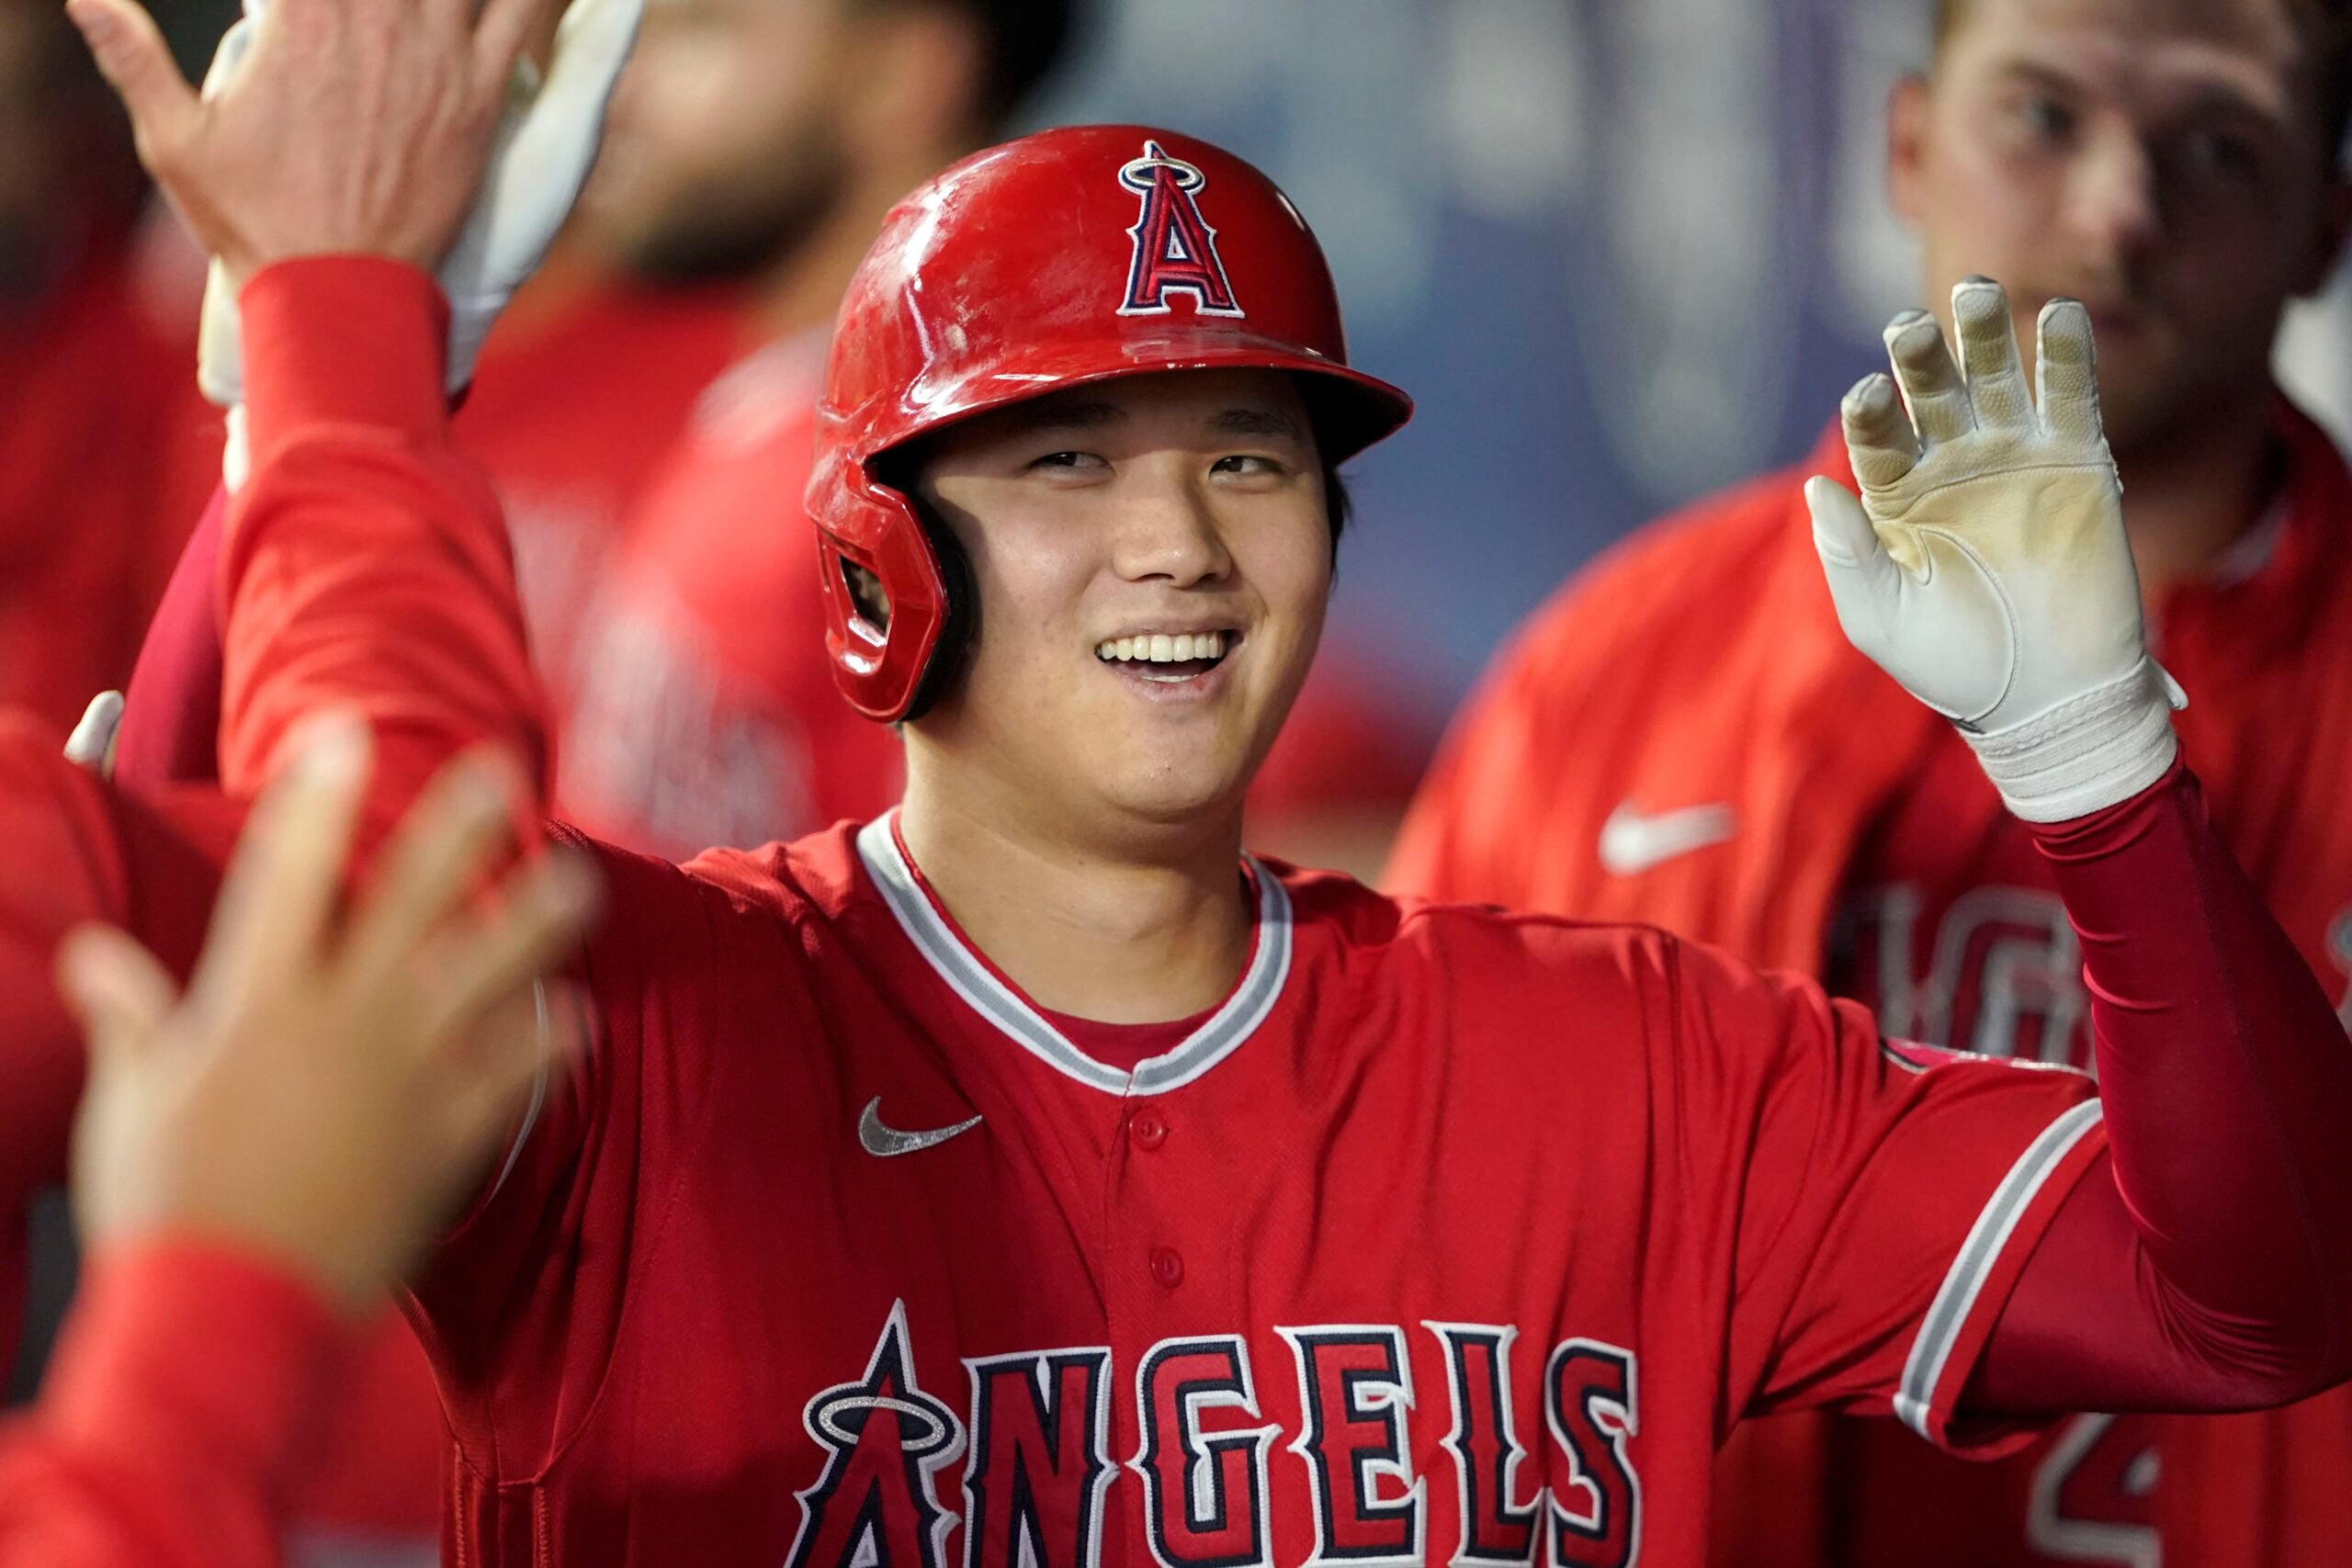 Shohei Ohtani earns win with perfect inning in two-way All-Star